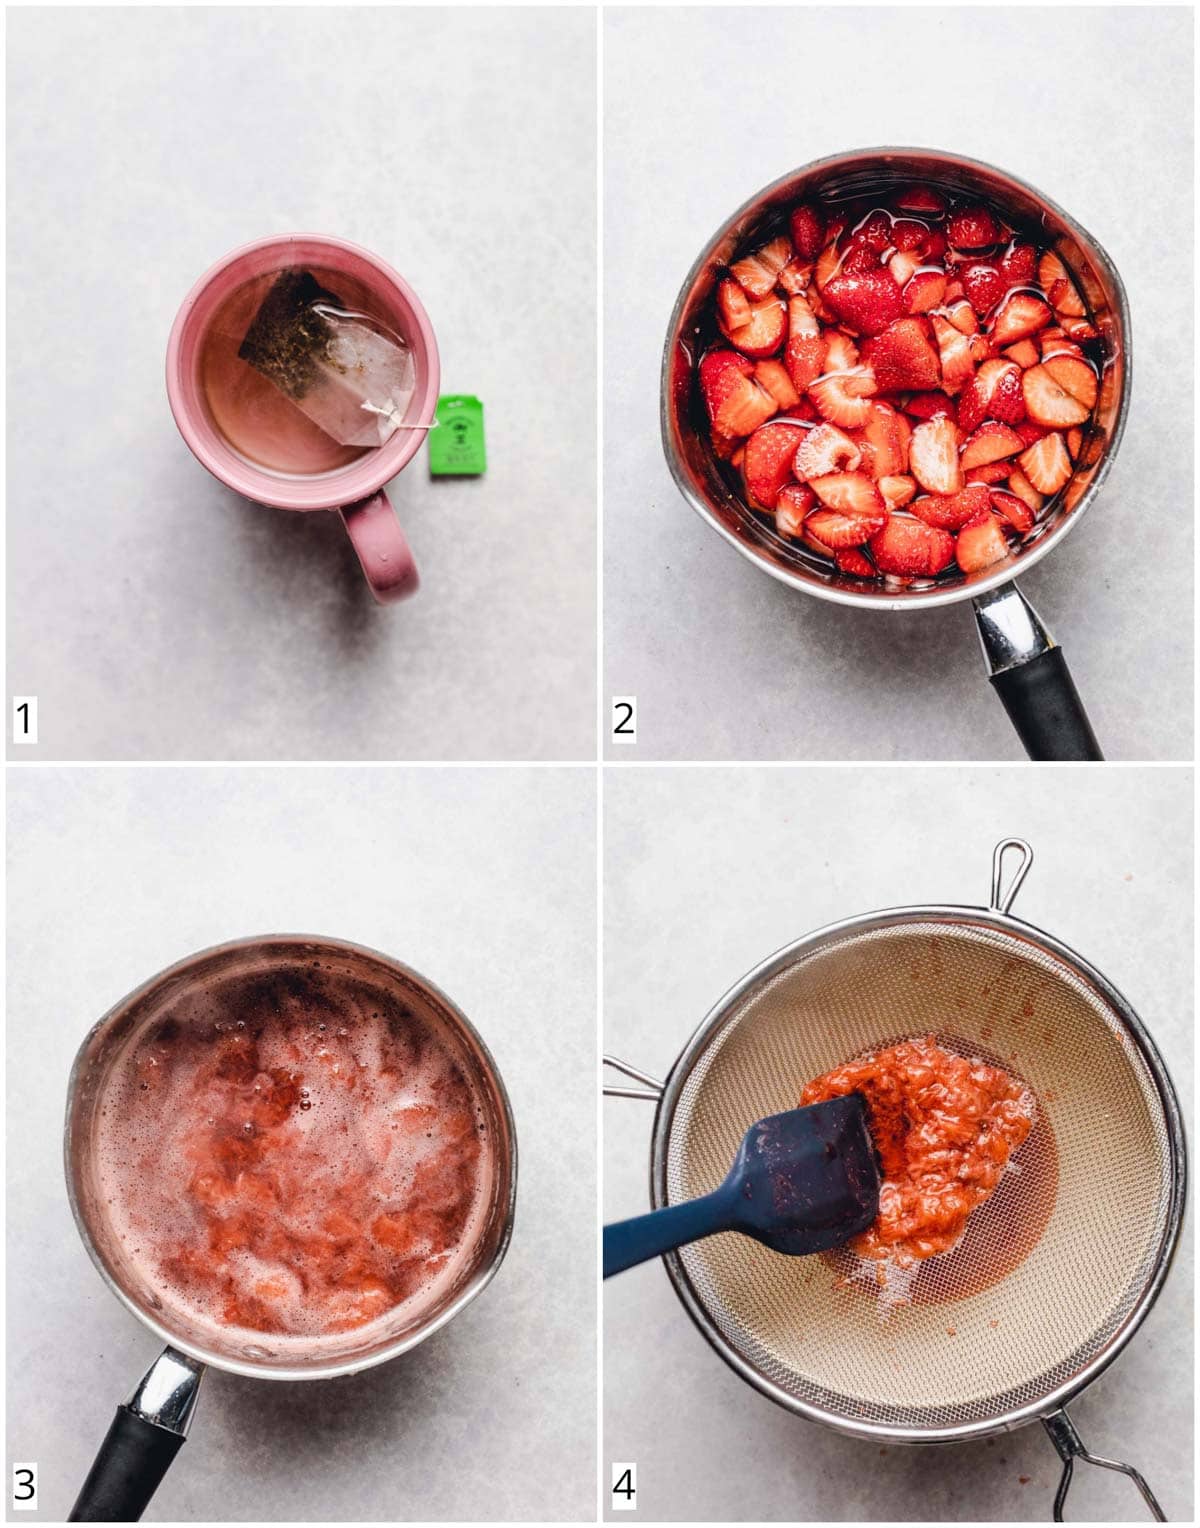 A collage of four images showing how to make bubble milk tea.